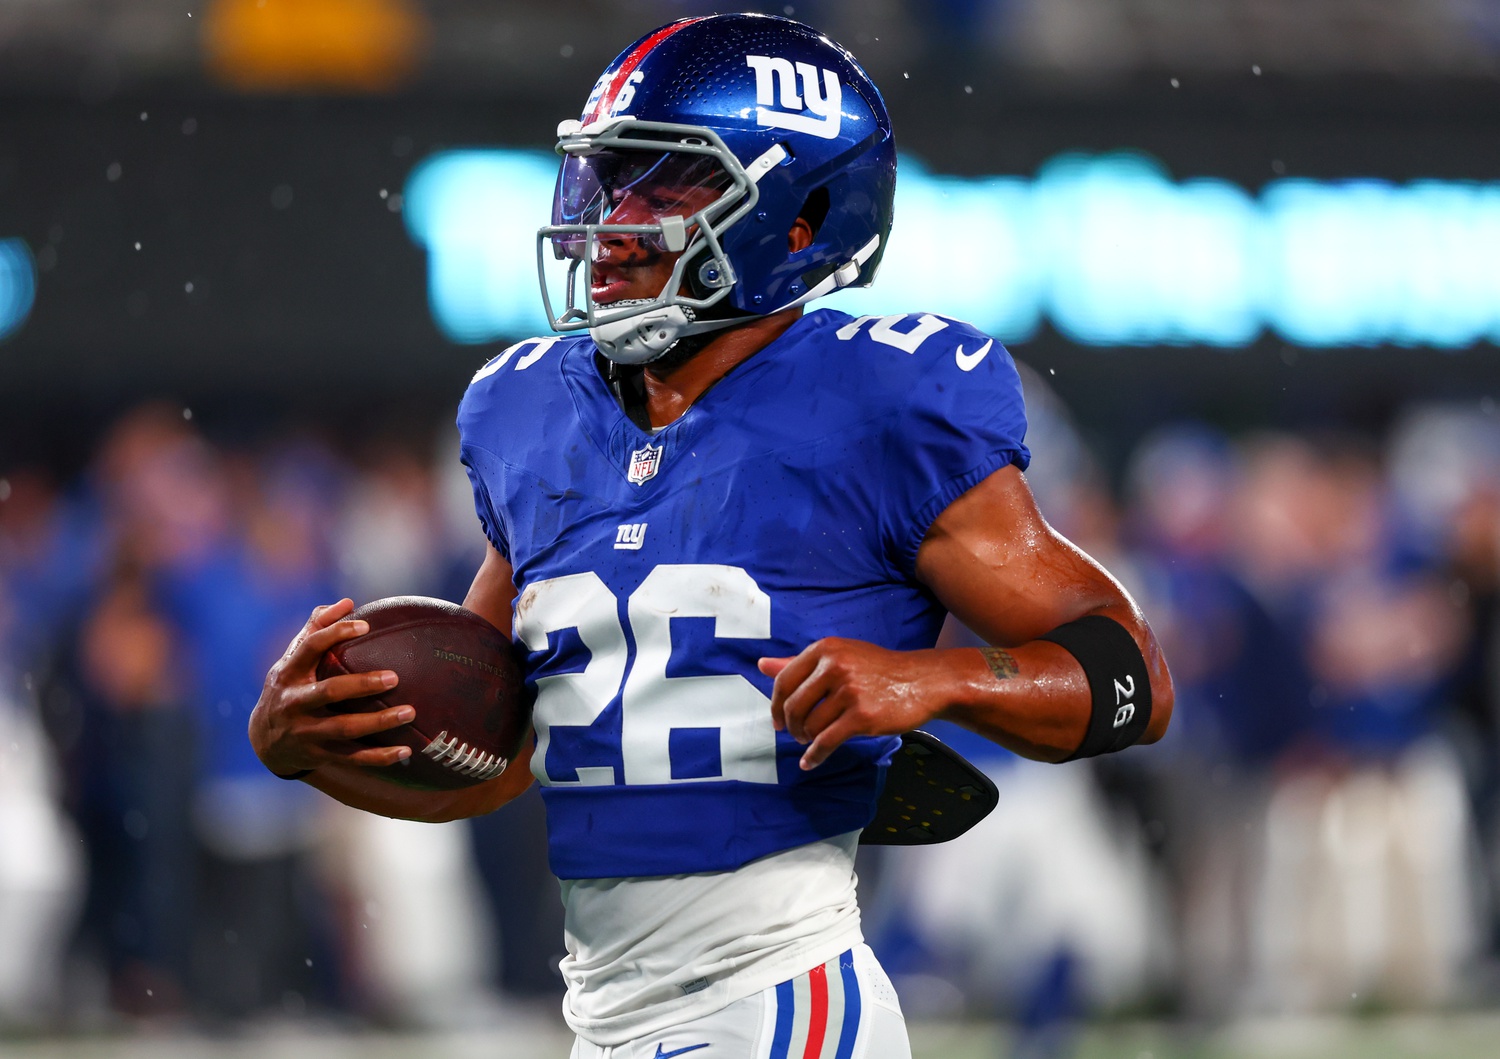 Giants give Evan Neal update after his concussion on Friday